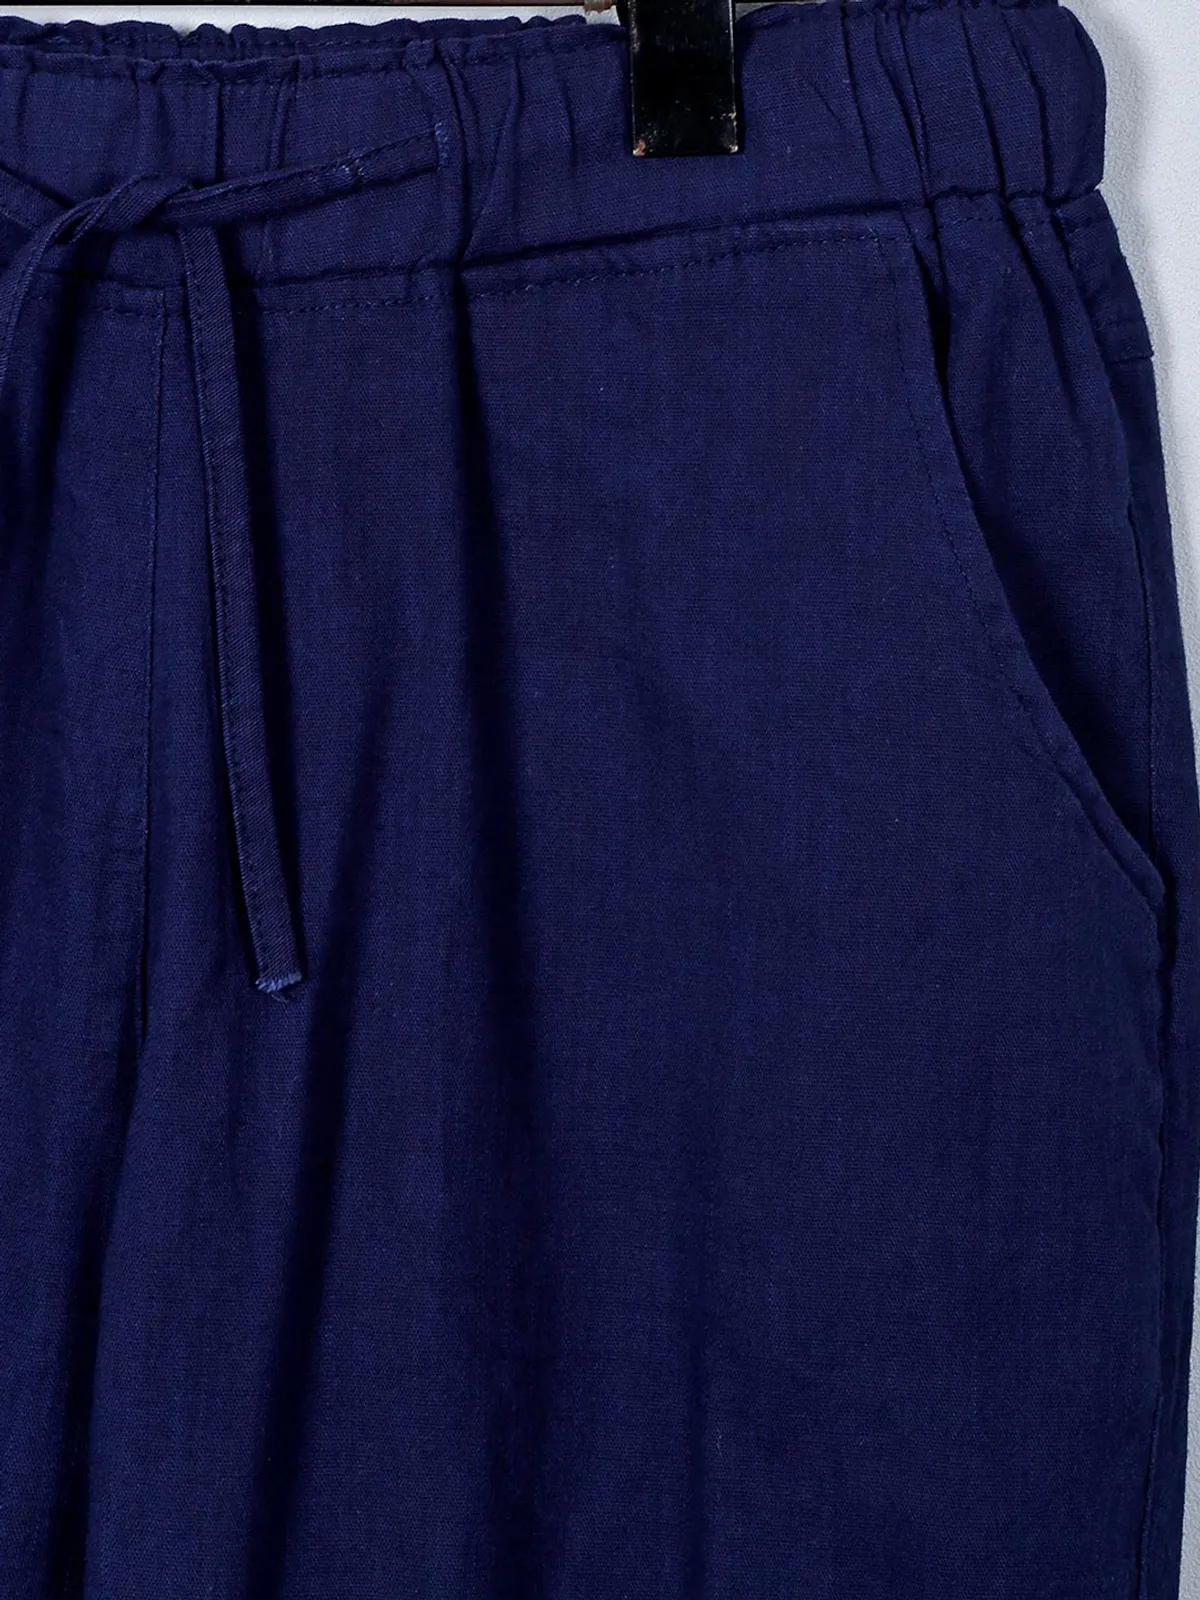 Latest blue palazzo pant for women